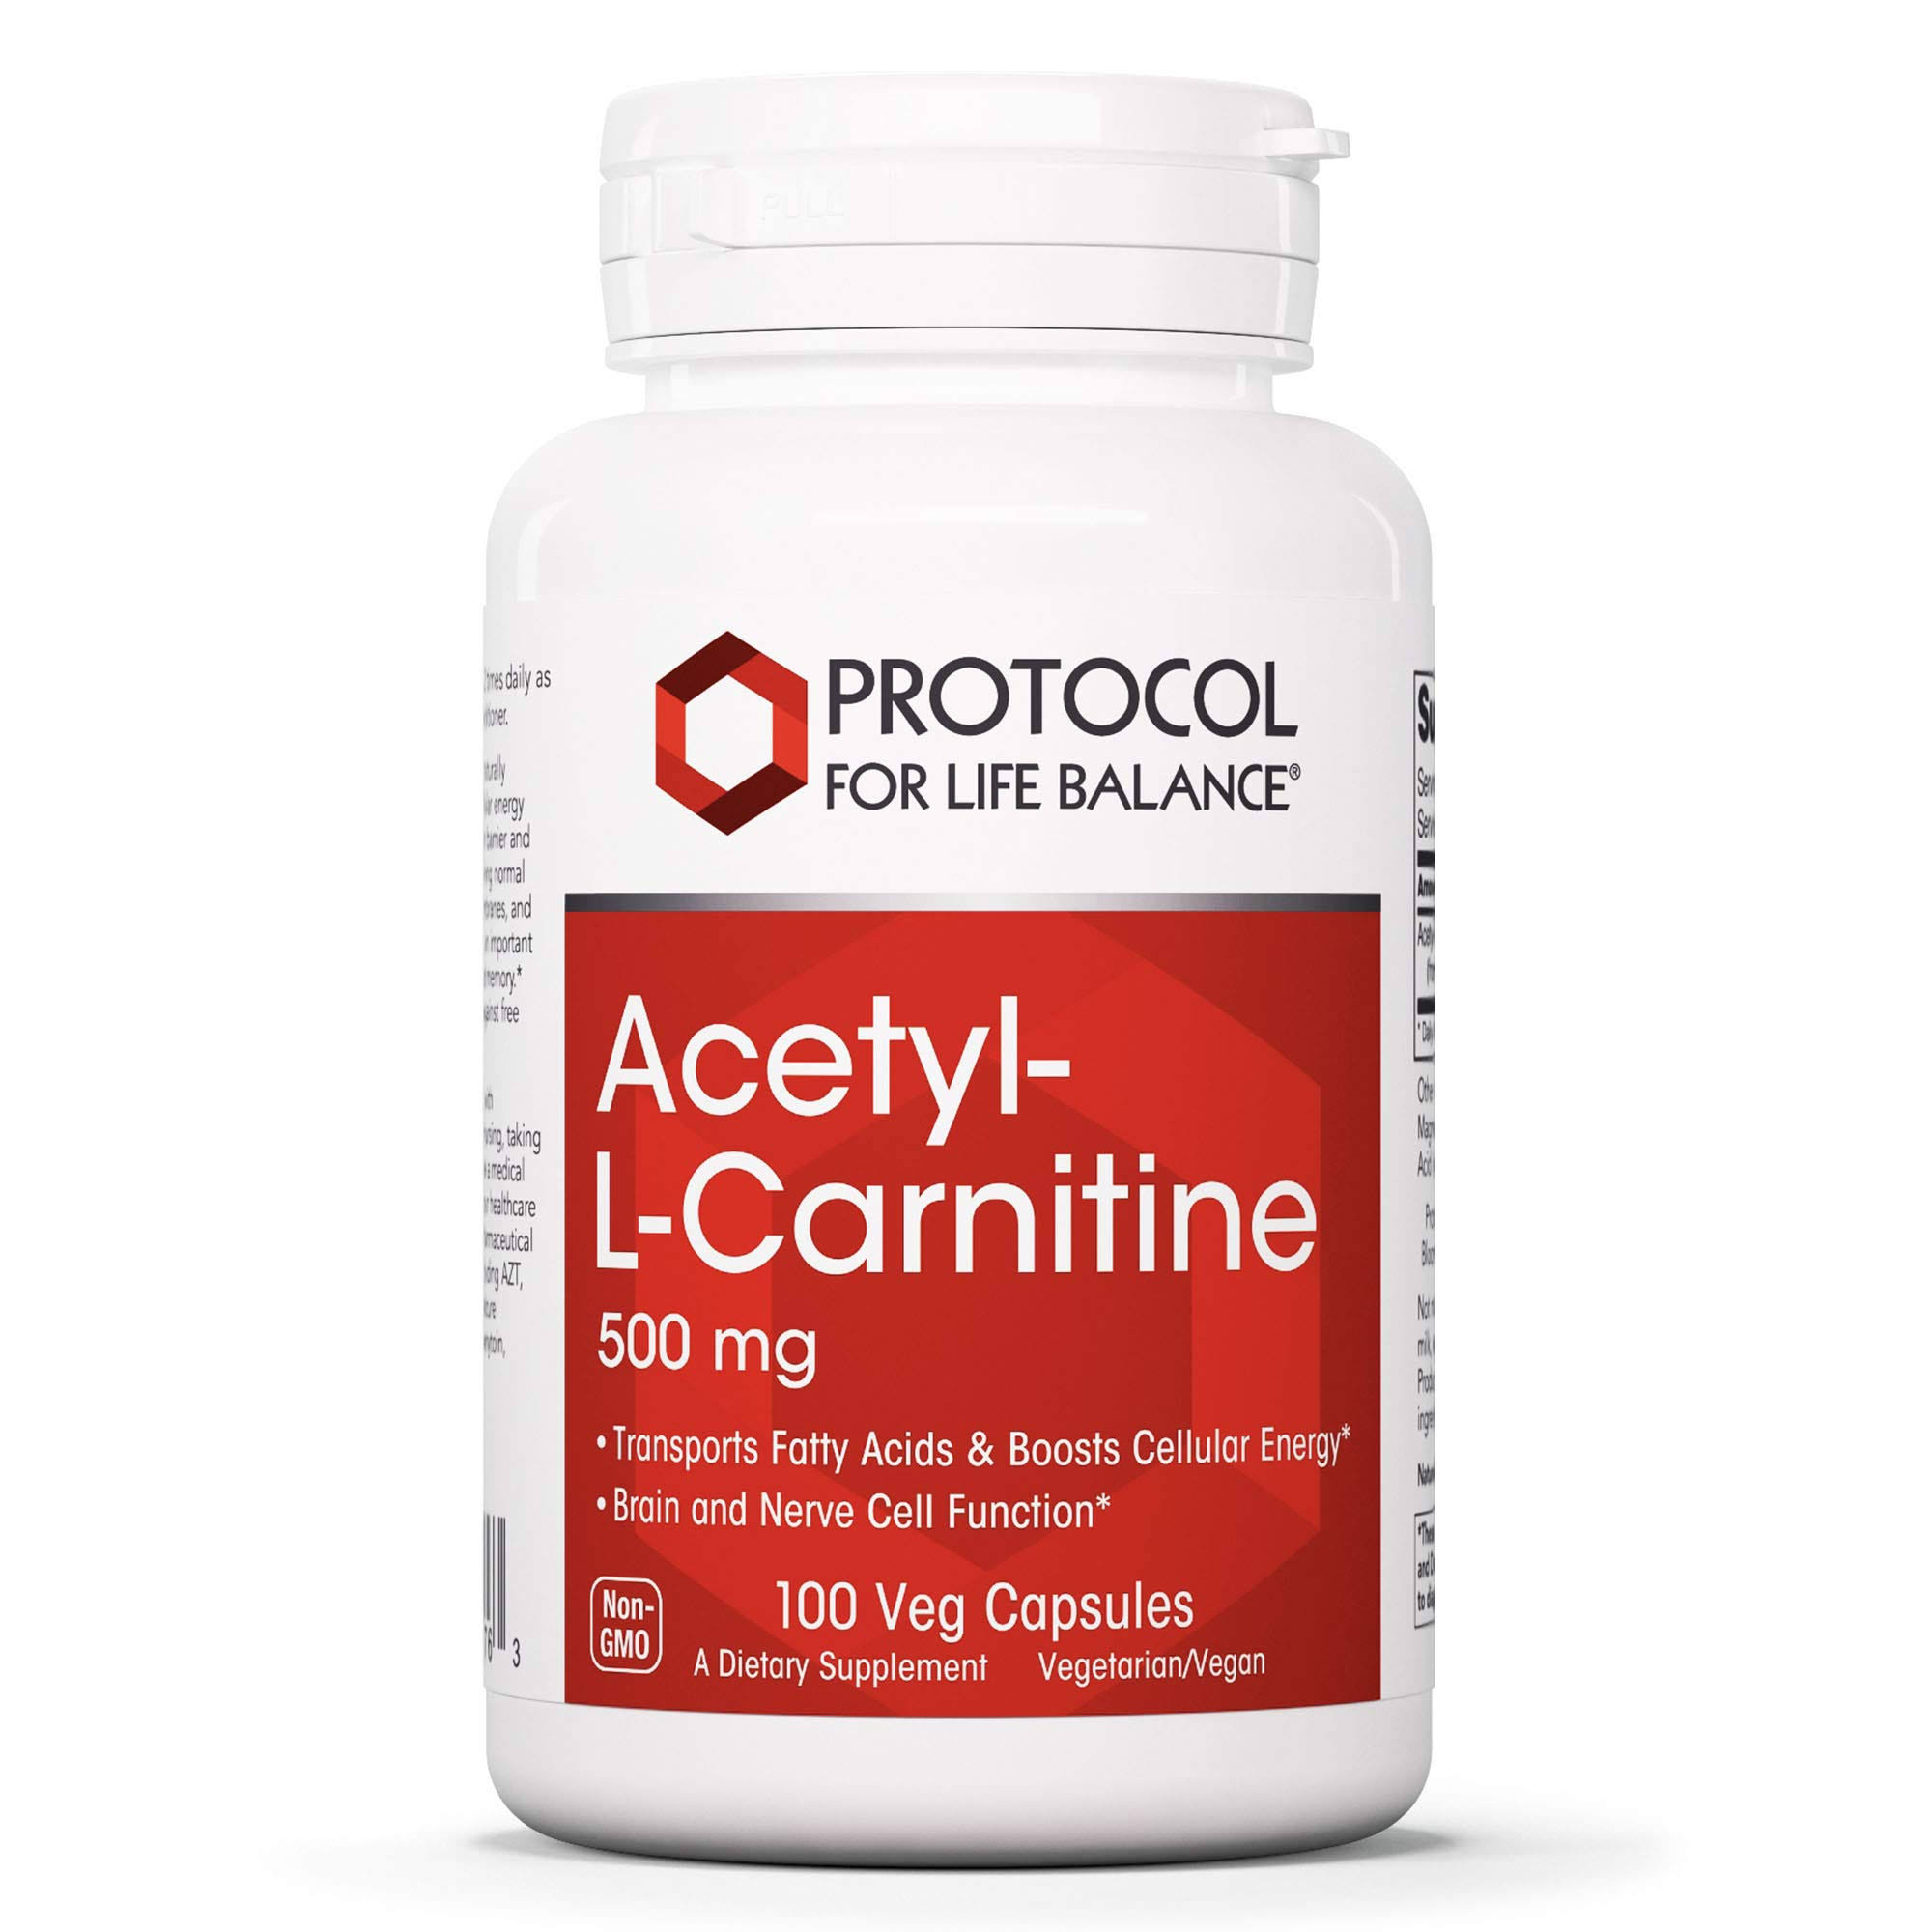 Protocol for Life Balance Acetyl-L-Carnitine - 500 mg - 100 VCapsules